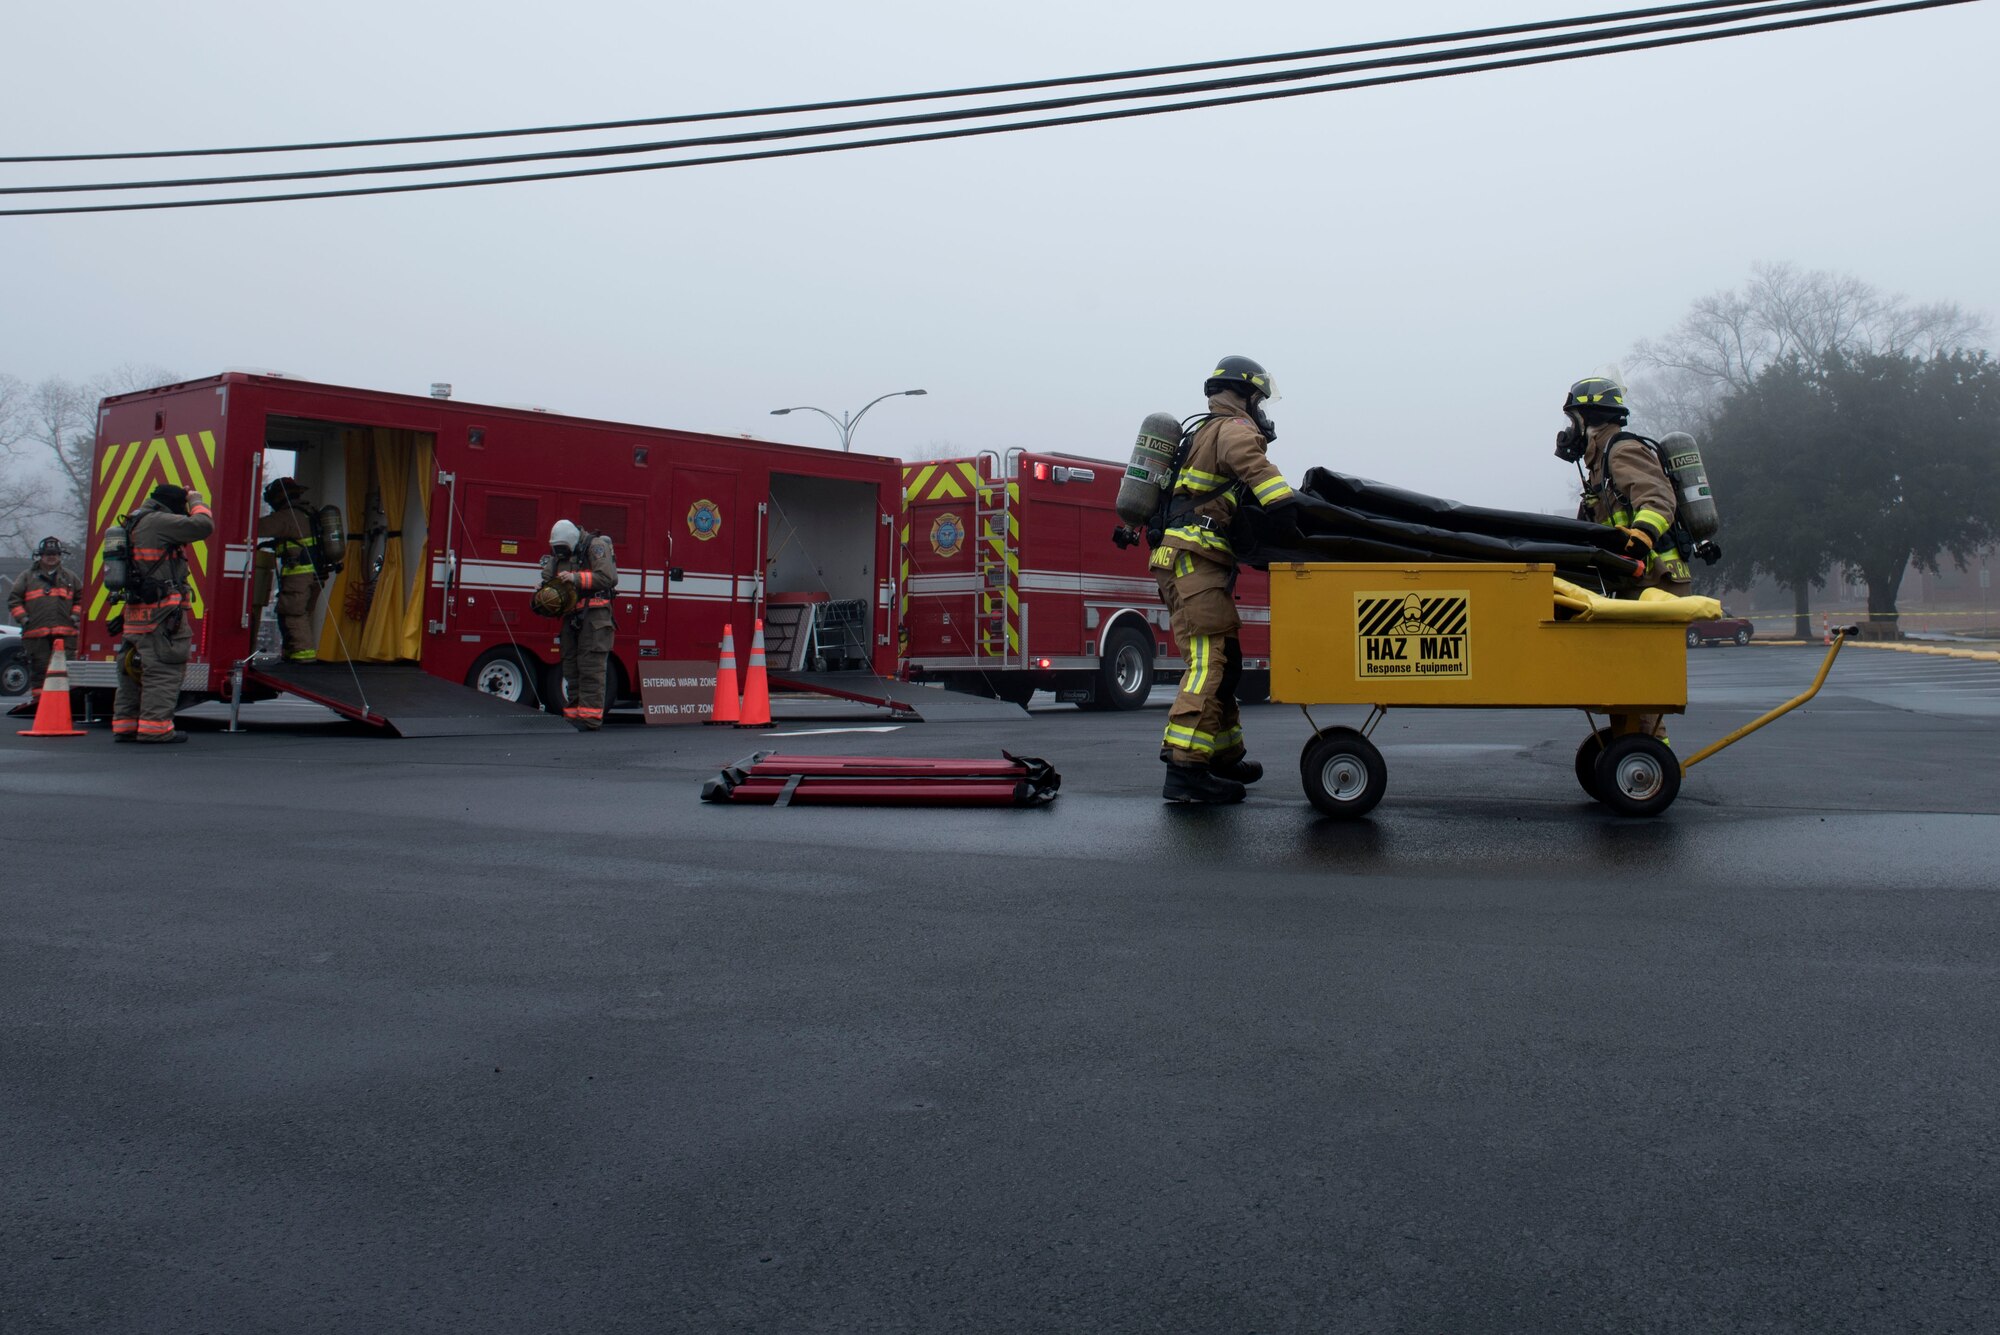 Members of the 4th Civil Engineer Squadron fire department and the Goldsboro Fire Department, set-up a decontamination station during a Hazardous Material Spill Response exercise, Dec. 9, 2019, in Goldsboro, N.C.